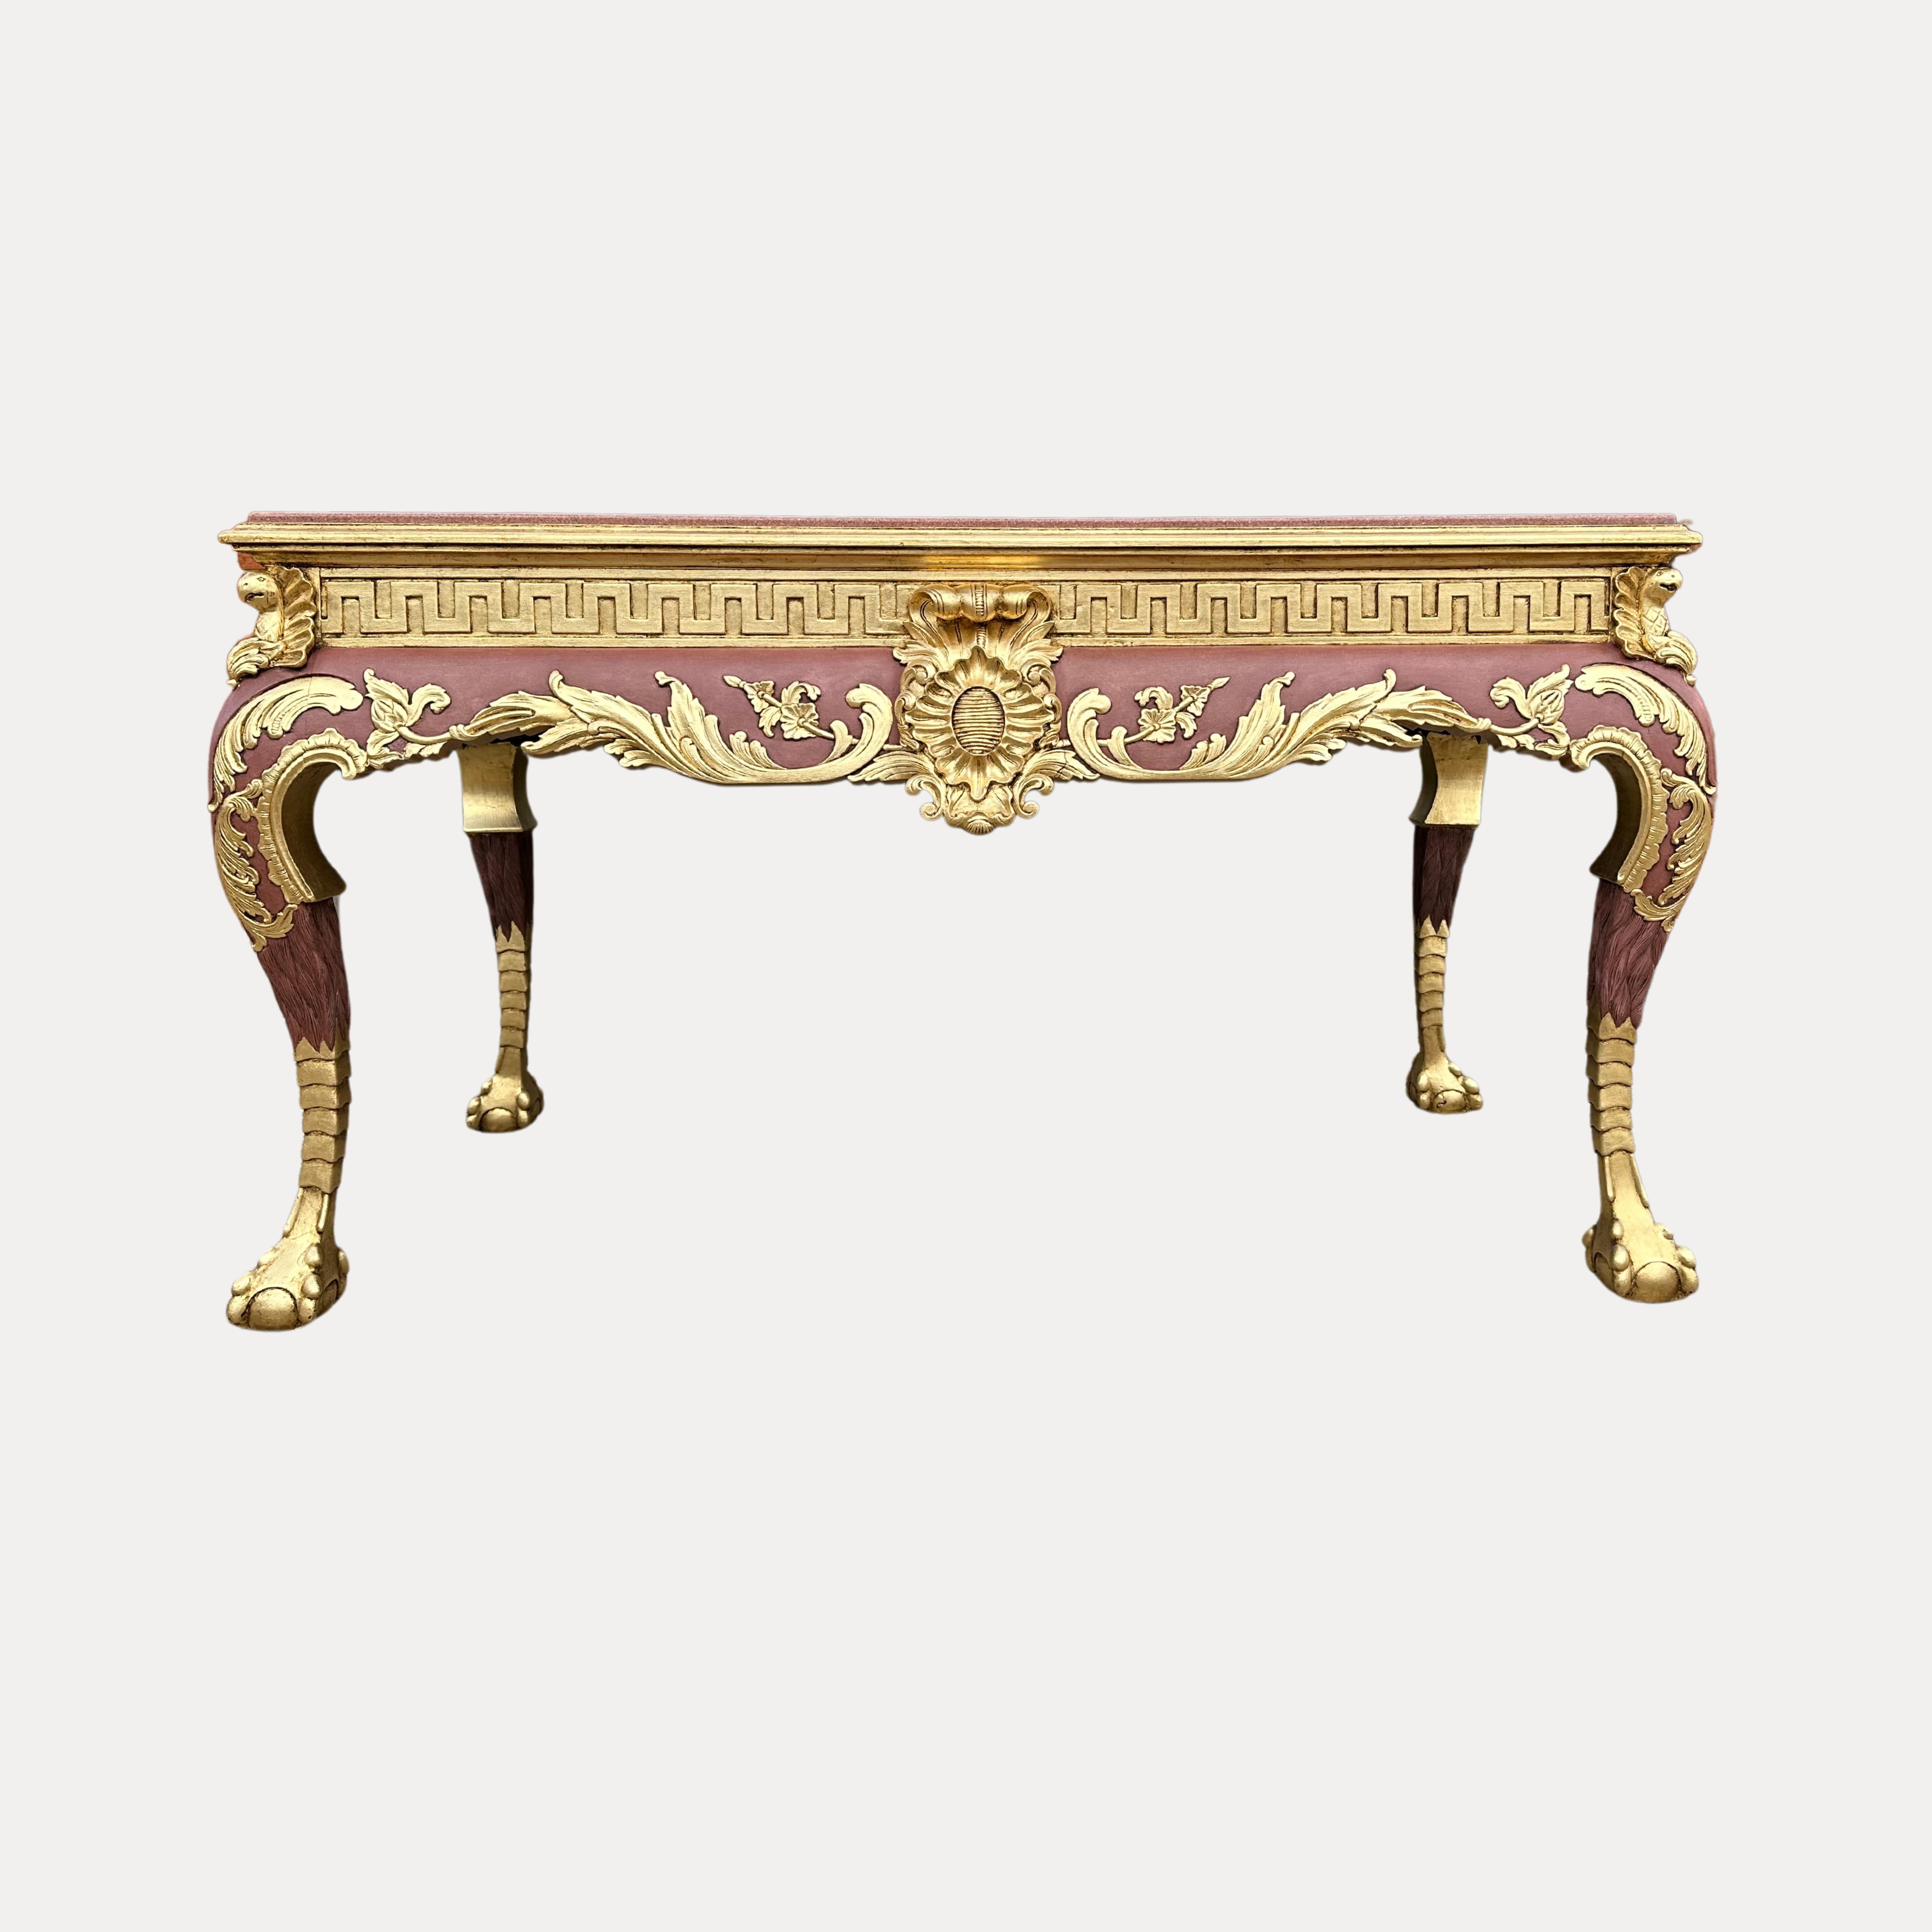 This exceptionally large, heavily carved Gilt wood centre table in the style of Louis XIV is truly magnificent. Both the front and back are decorated with a central shield with parakeets to all four corners.
The massive green faux marble top is held